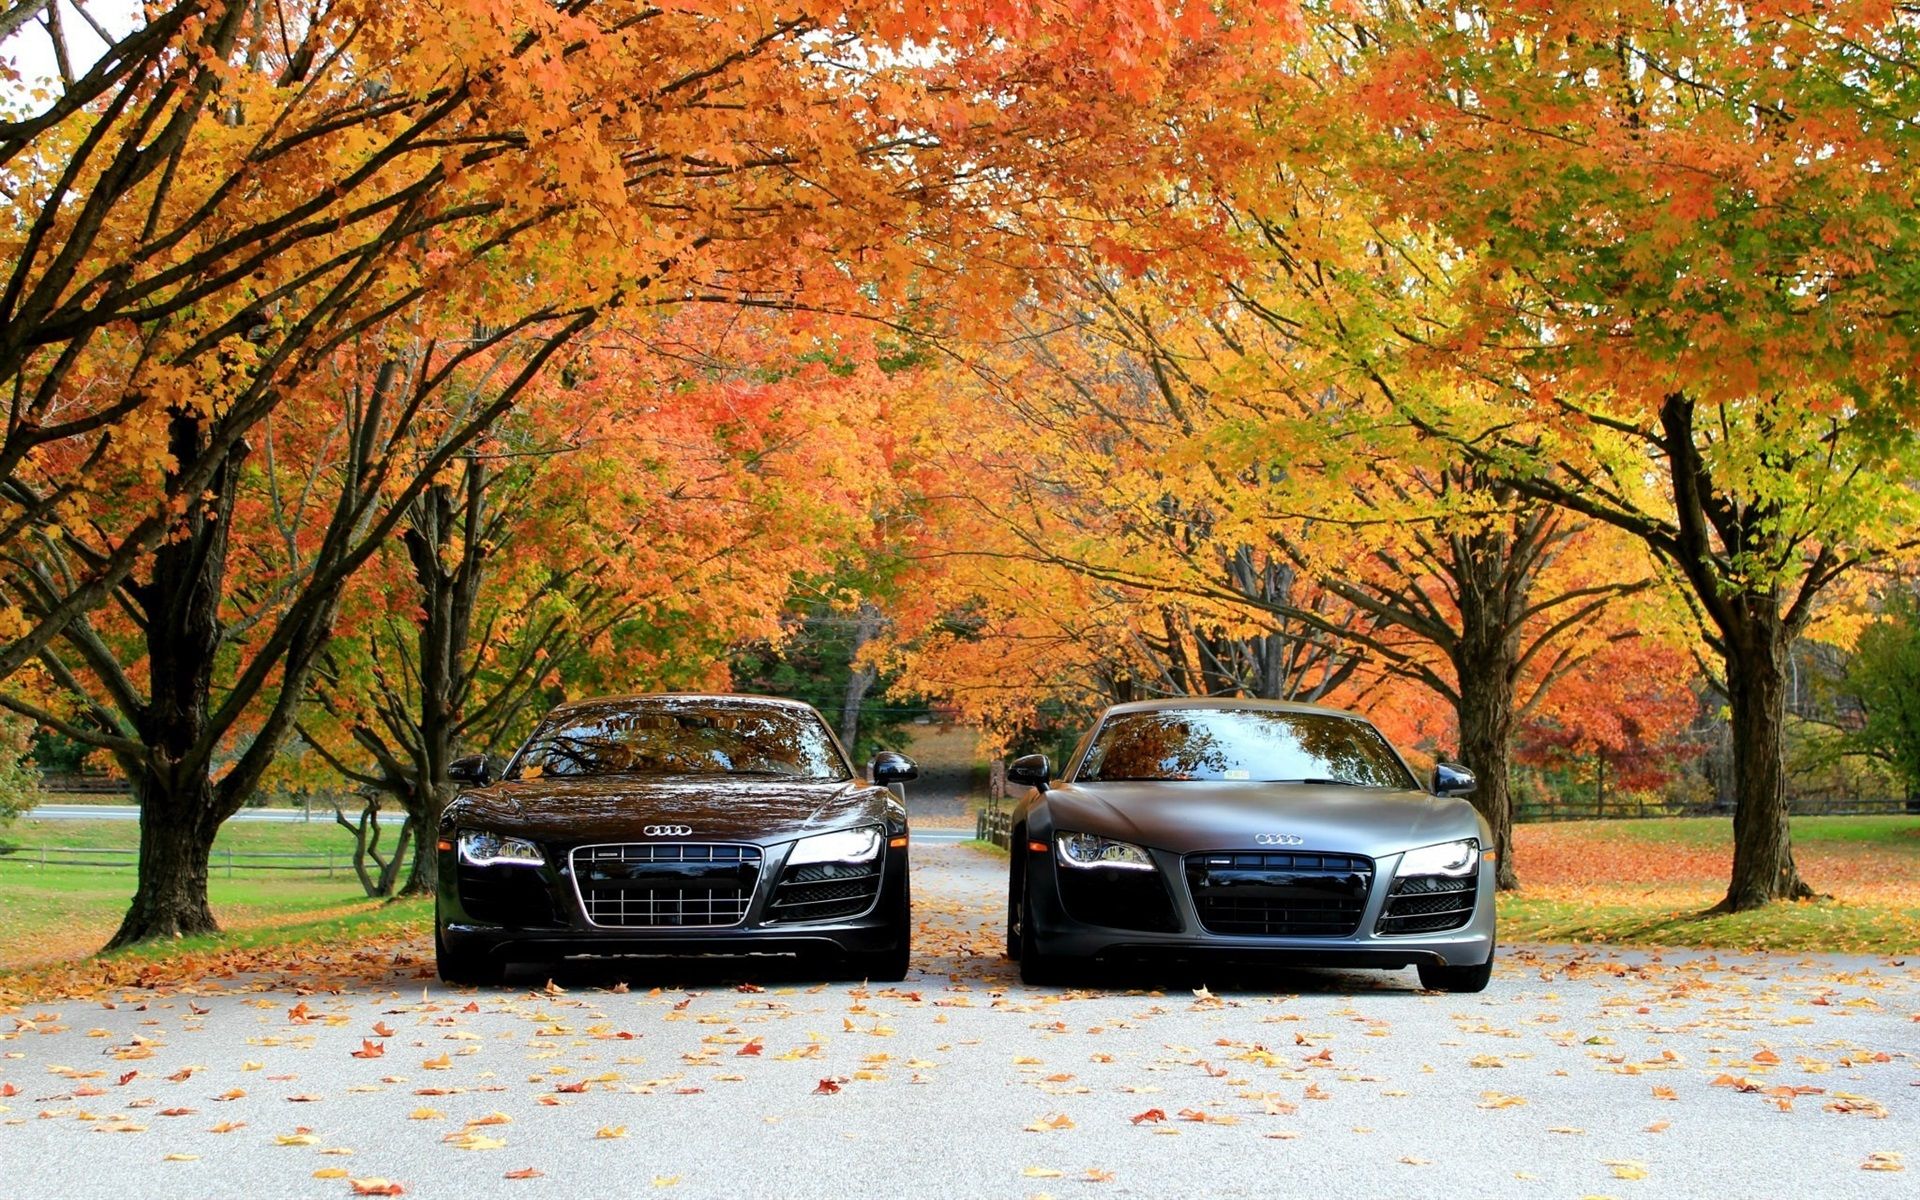 Wallpaper Audi R8 V10 cars front view, autumn, trees 1920x1200 HD Picture, Image